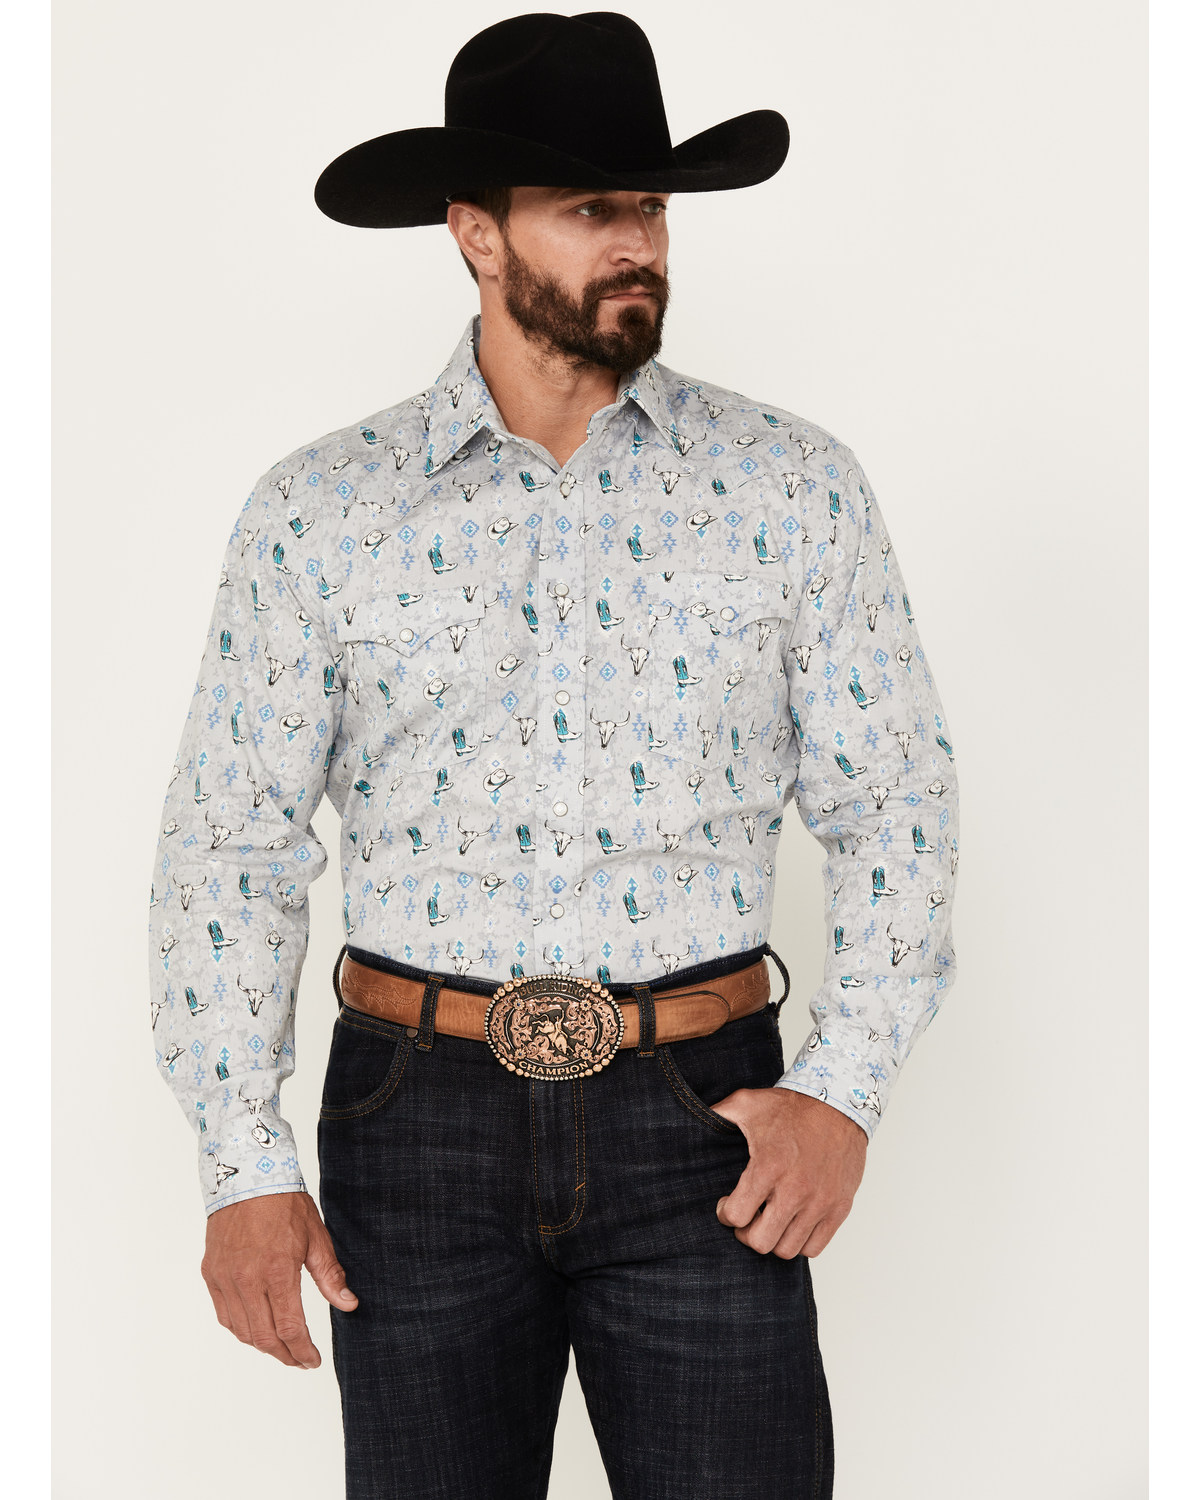 Rough Stock by Panhandle Men's Novelty Print Long Sleeve Snap Western Shirt